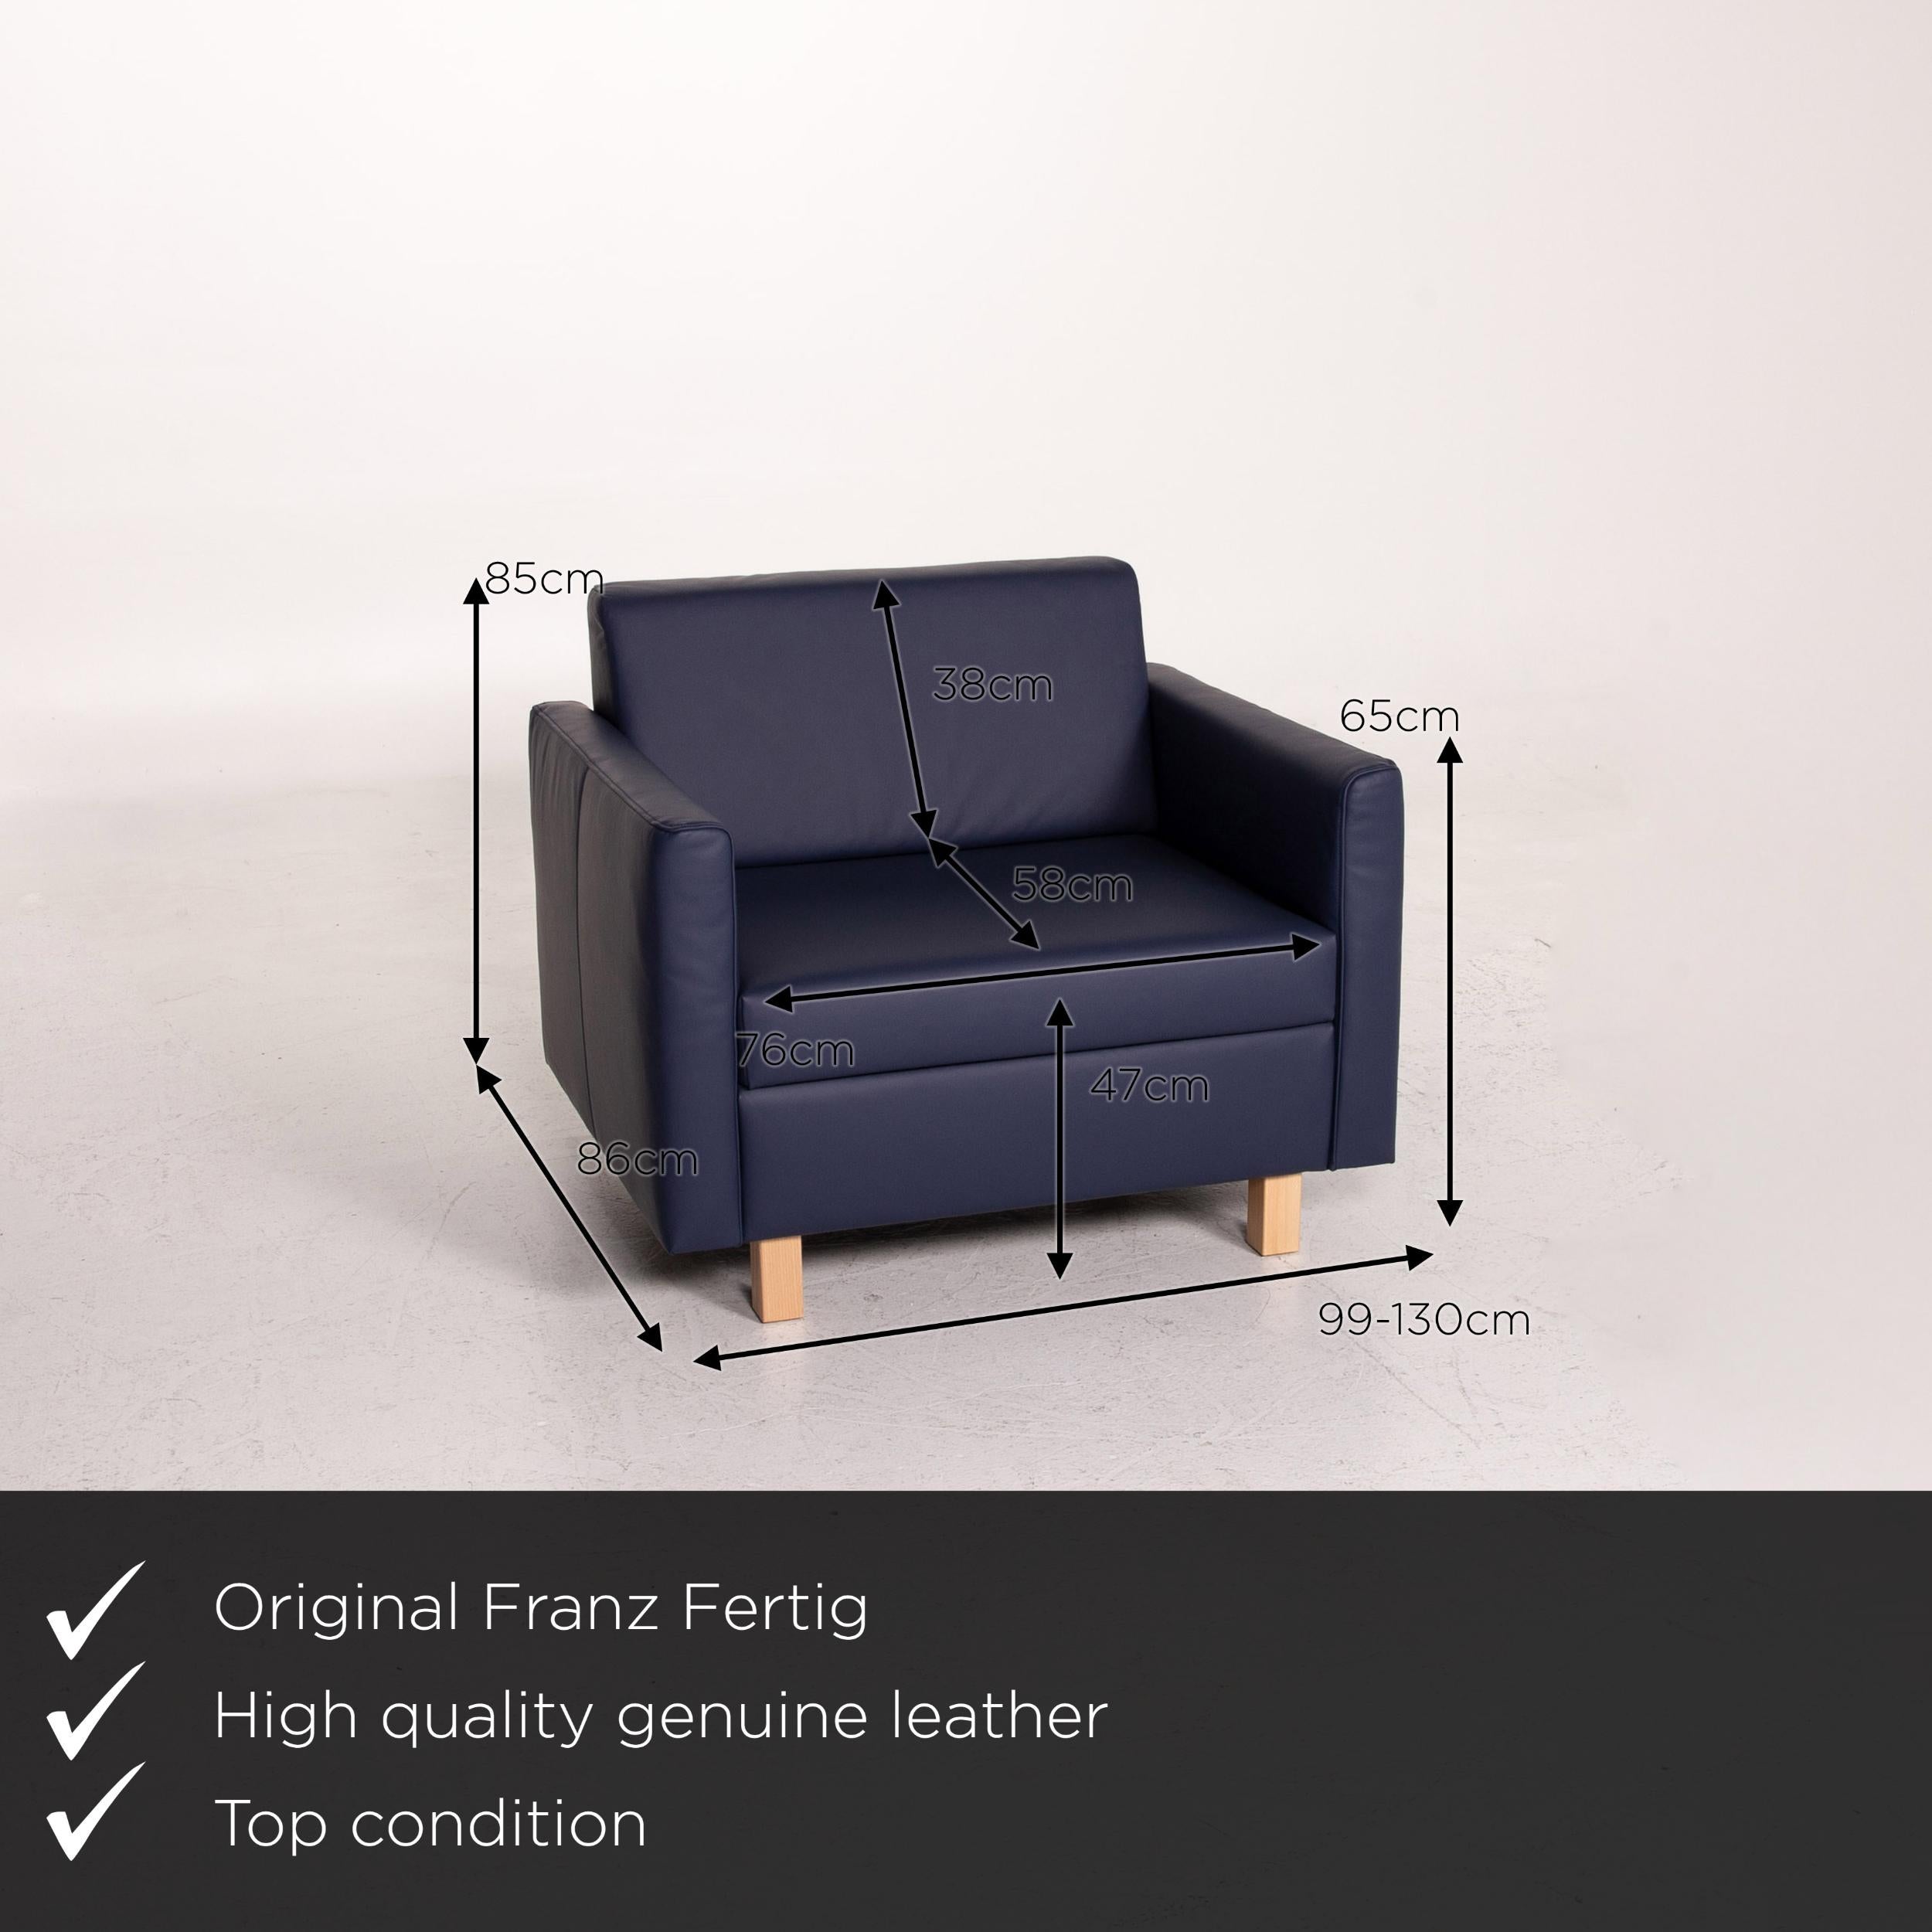 We present to you a Franz Fertig Minnie leather armchair blue dark blue.
   
 

 Product measurements in centimeters:
 

Depth 86
Width 99
Height 85
Seat height 47
Rest height 65
Seat depth 58
Seat width 76
Back height 38.